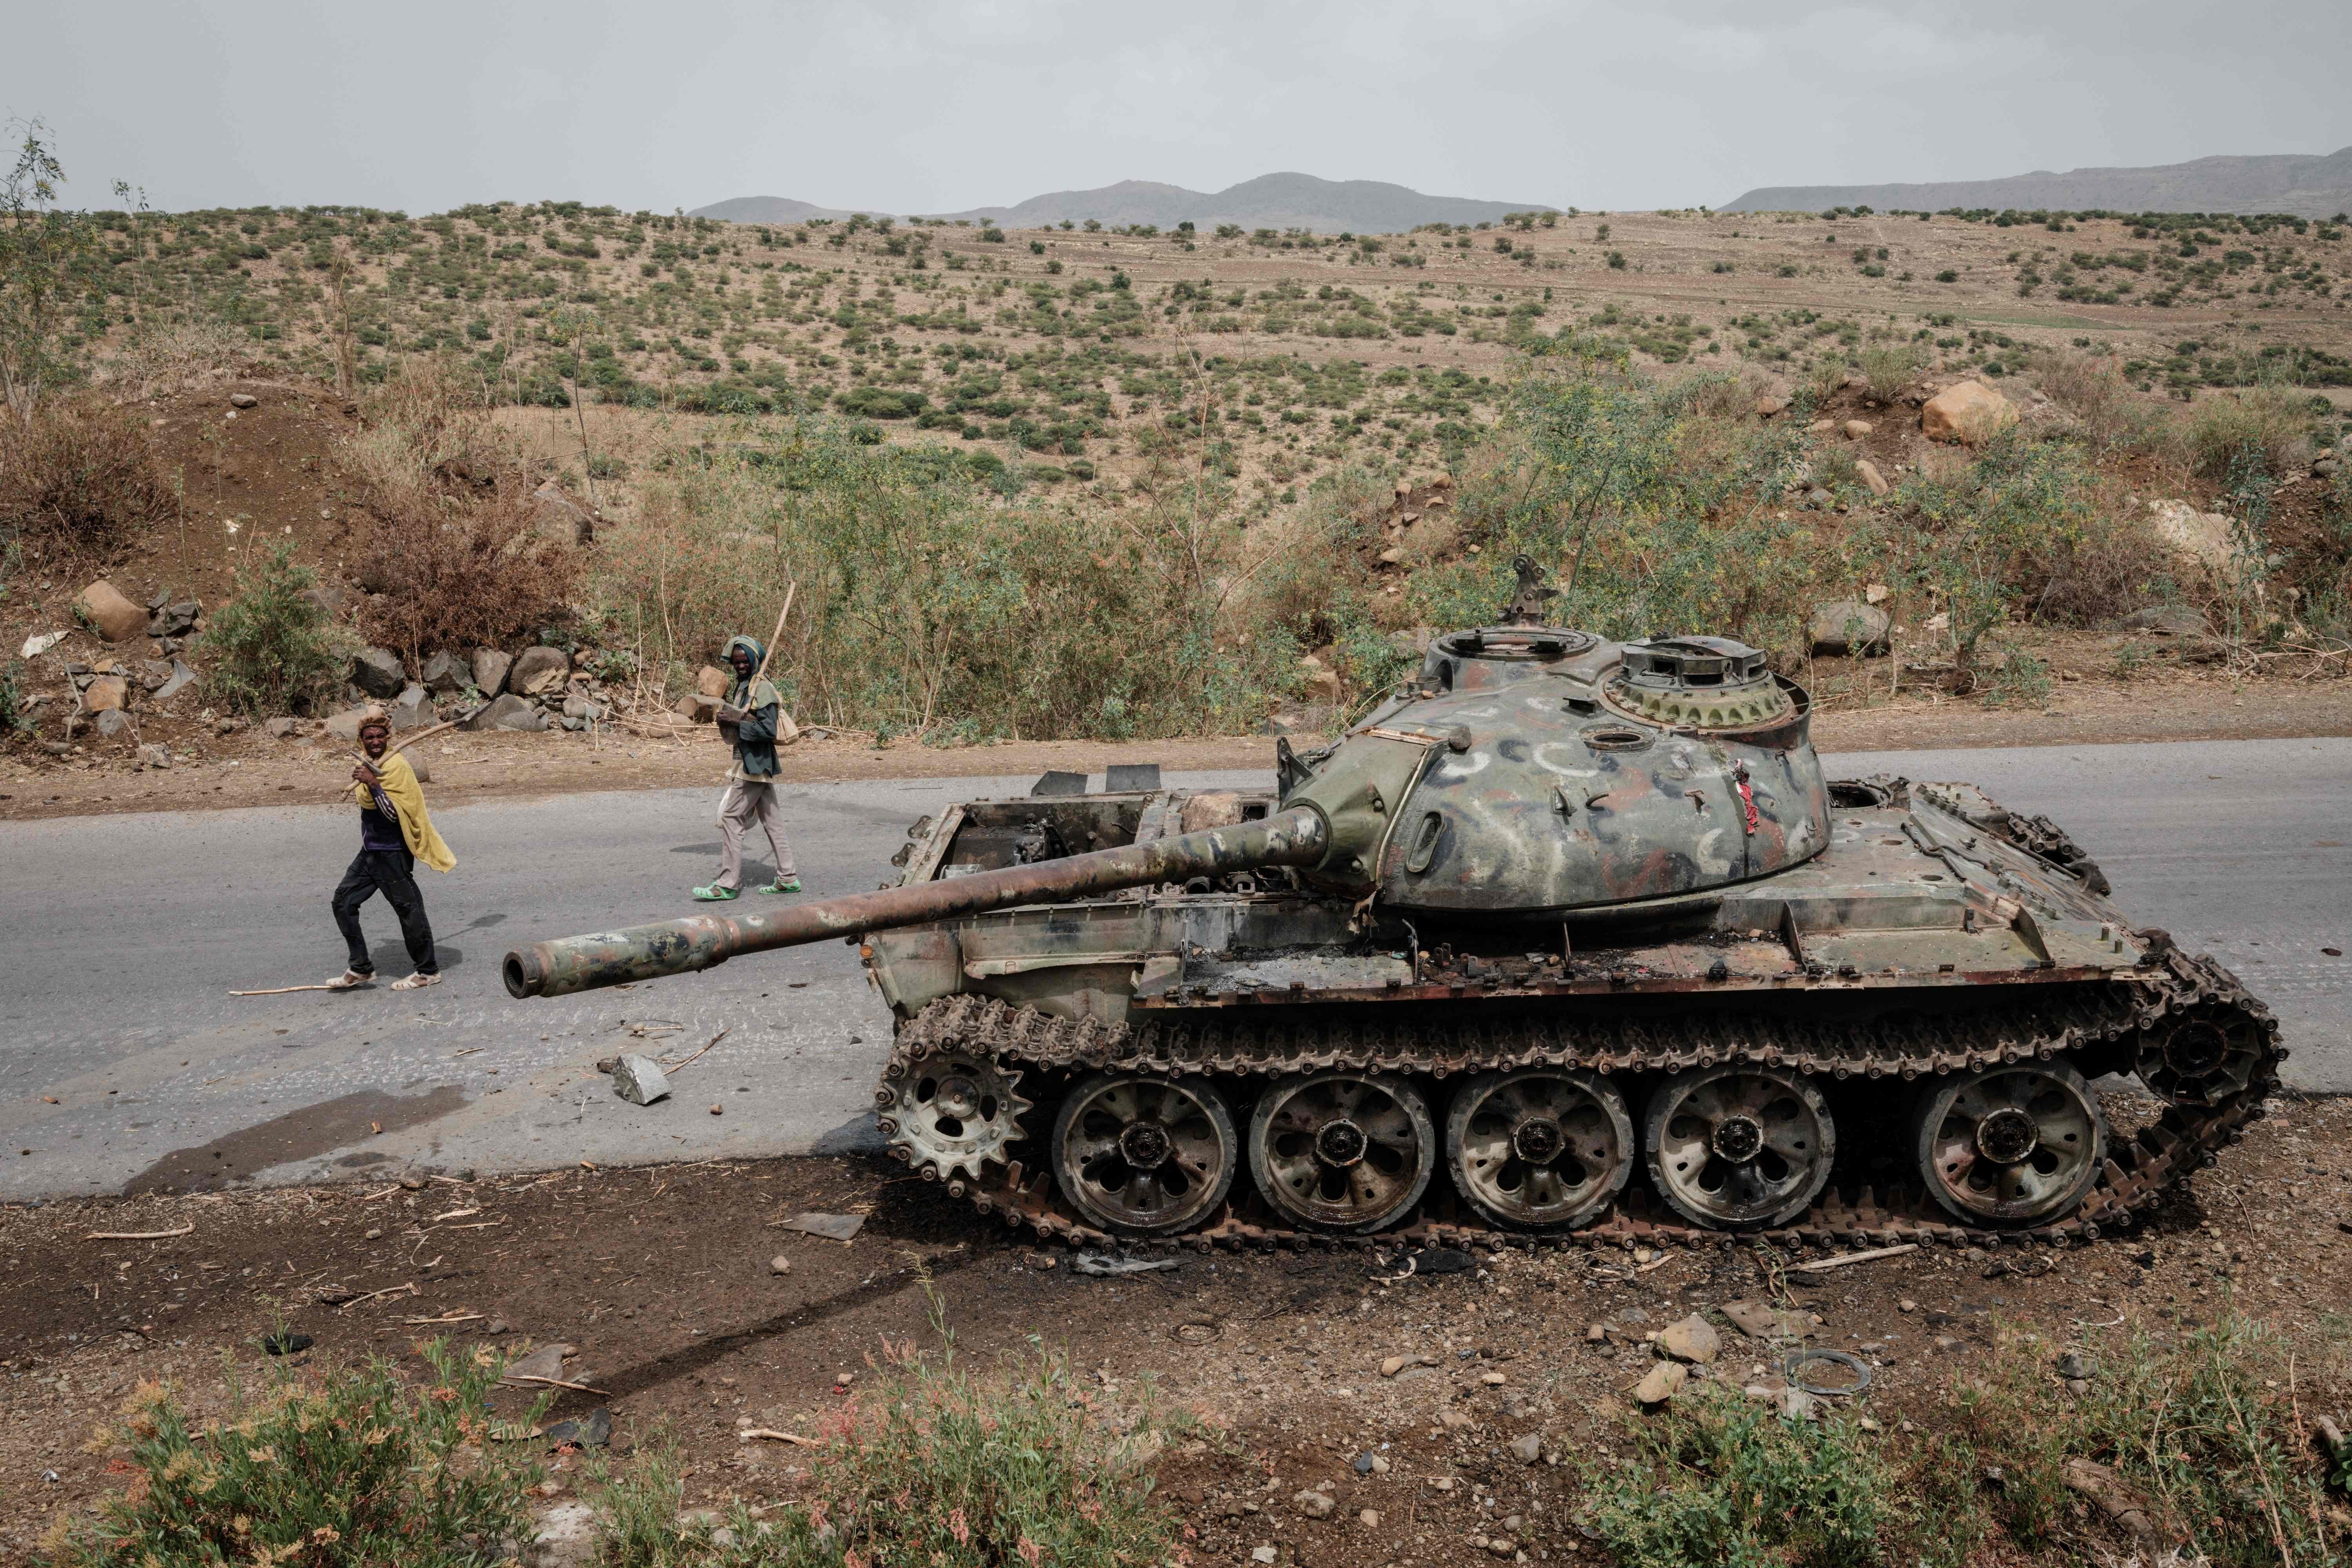 Local farmers walk next to a damaged tank that is abandoned along the road in this file photo taken in Dansa, southwest of Mekele in Tigray region, Ethiopia, June 20, 2021. (Photo by Yasuyoshi CHIBA / AFP)